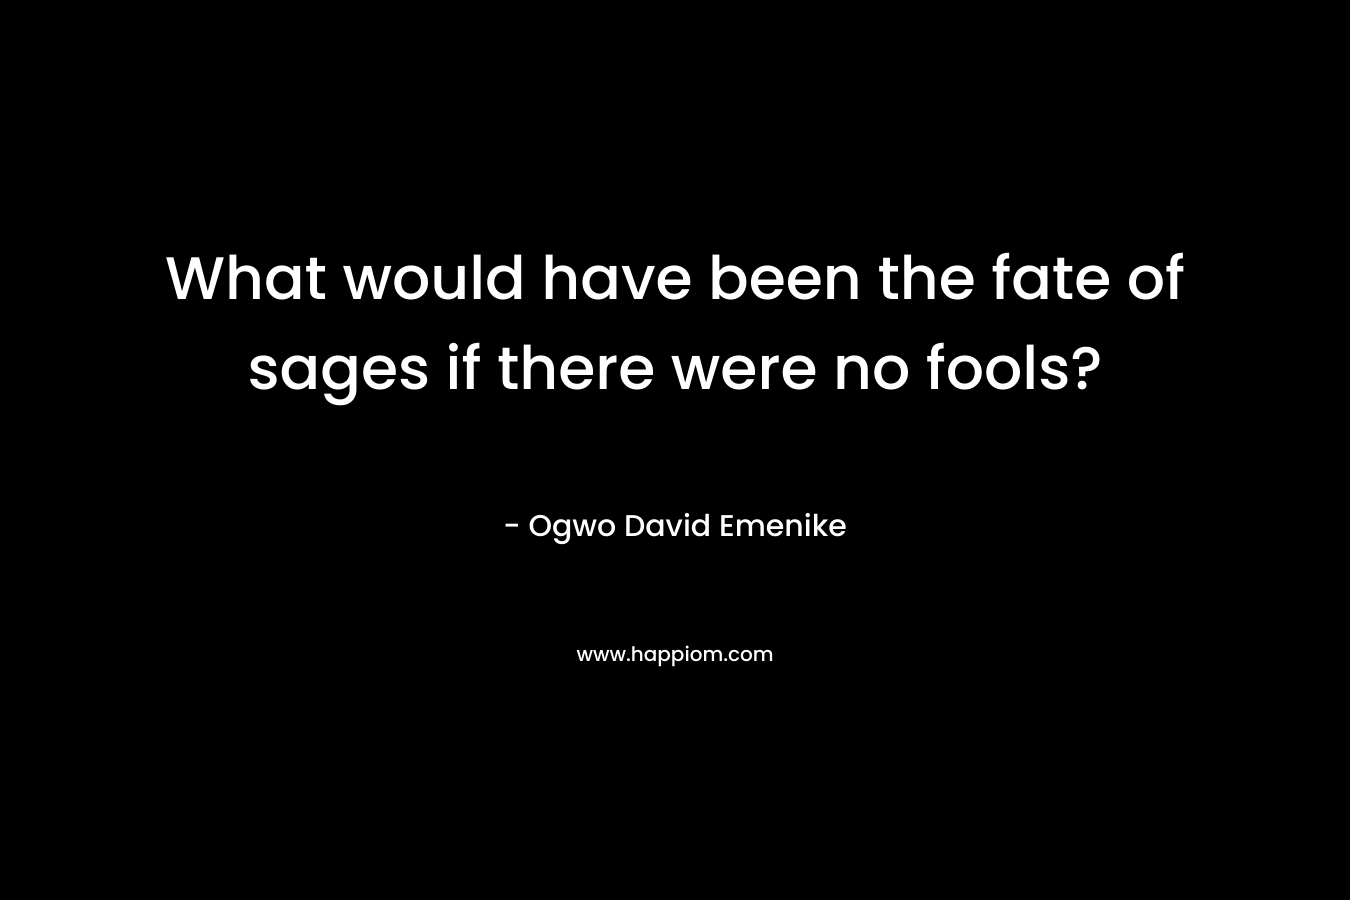 What would have been the fate of sages if there were no fools? – Ogwo David Emenike